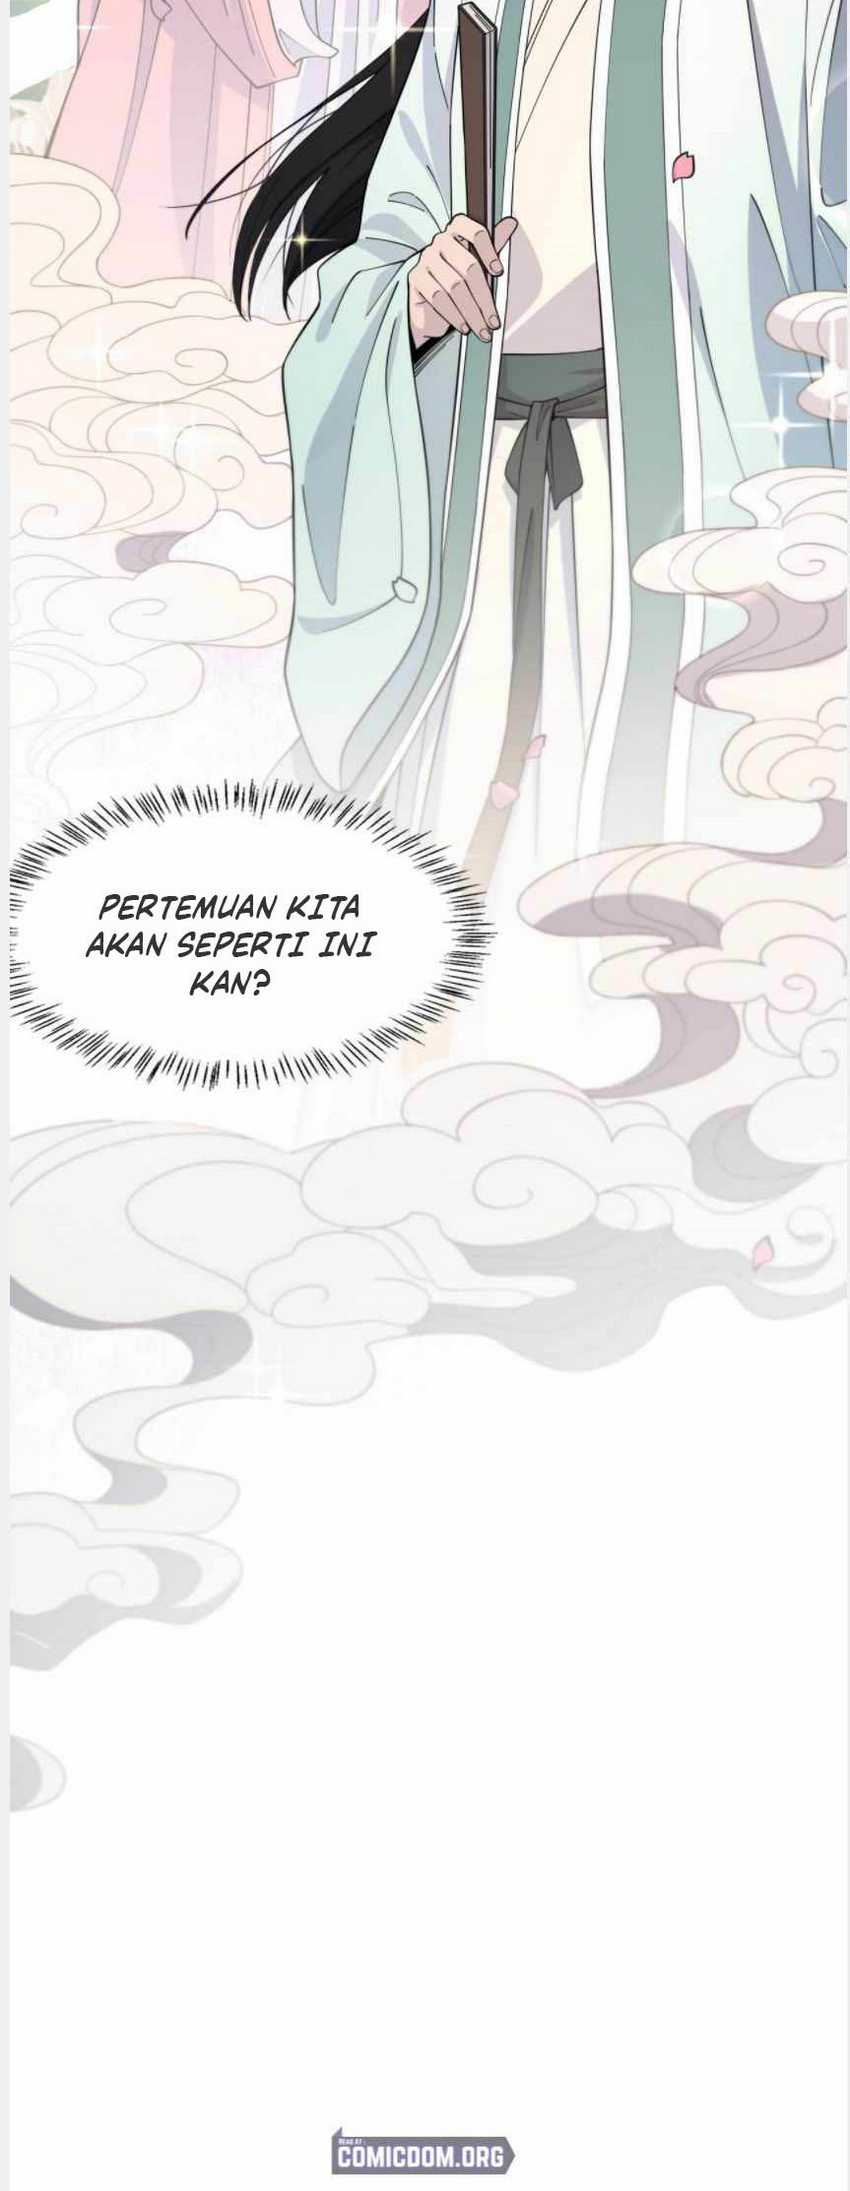 Great Doctor Ling Ran Chapter 98